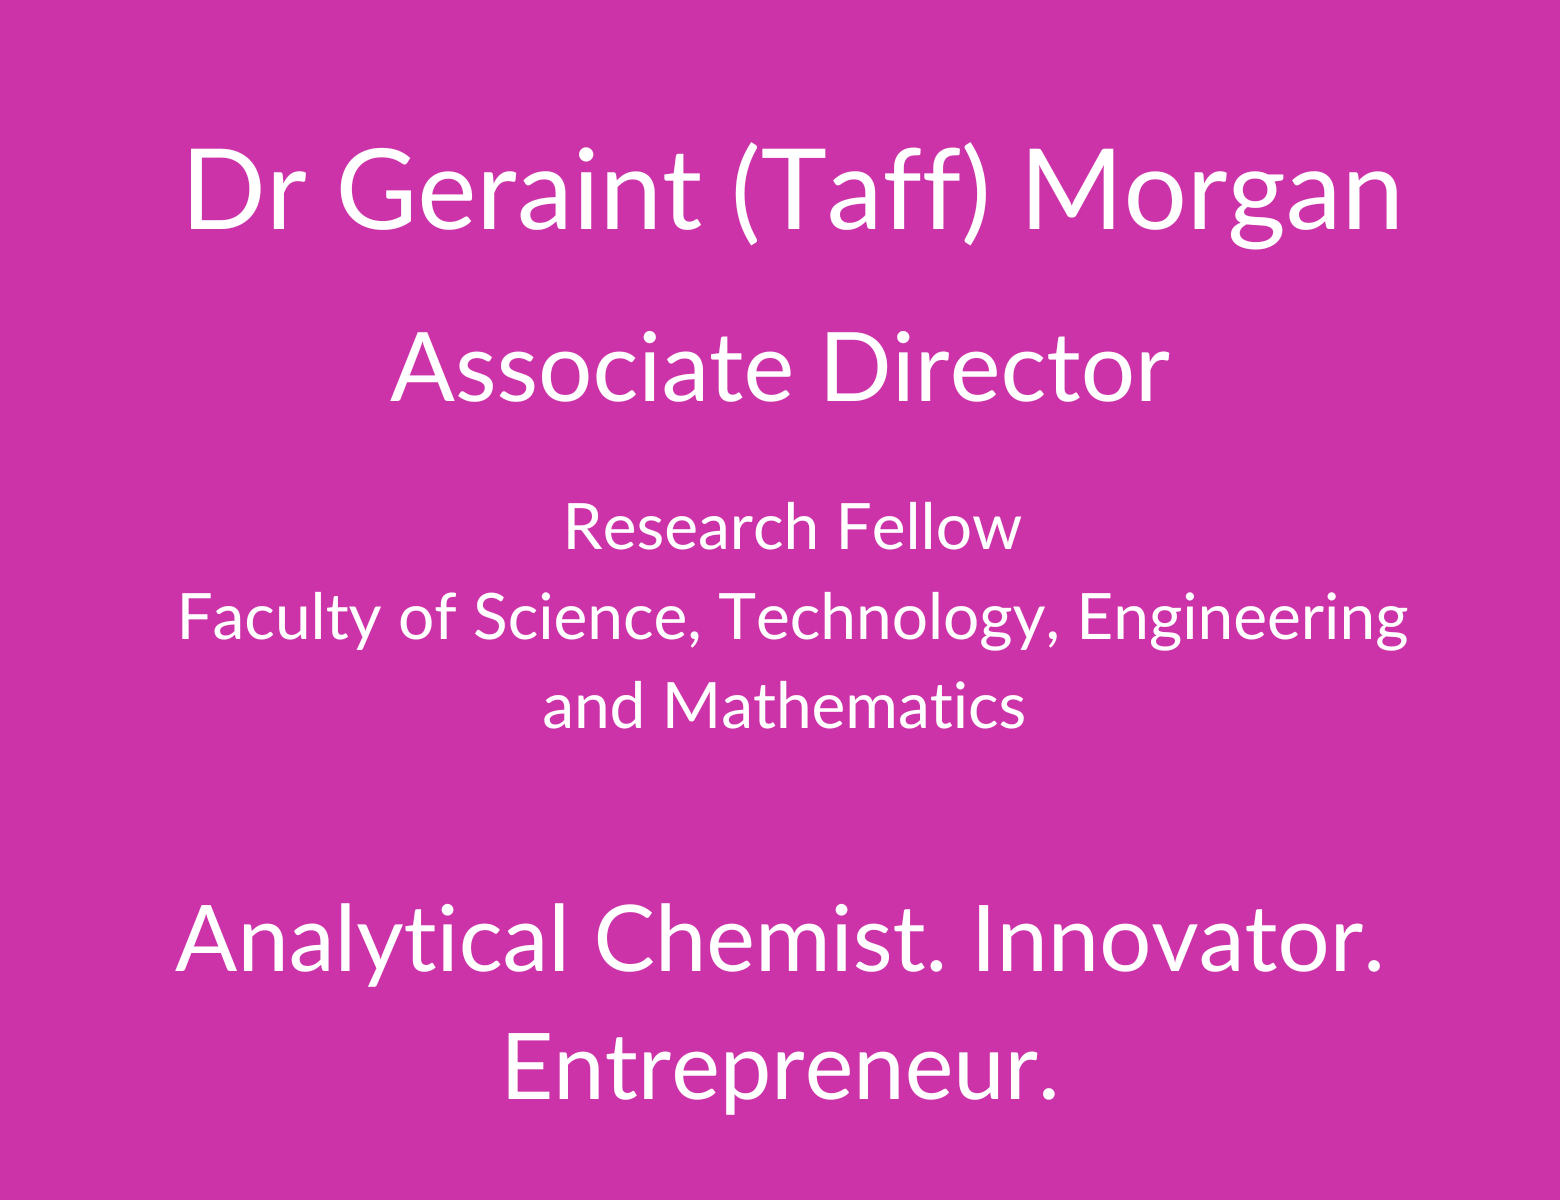 Dr Geraint (Taff) Morgan. Research Fellow. Faculty of Science. Technology, Engineering and Mathematics. Analytical Chemist. Innovator. Entrepreneur.